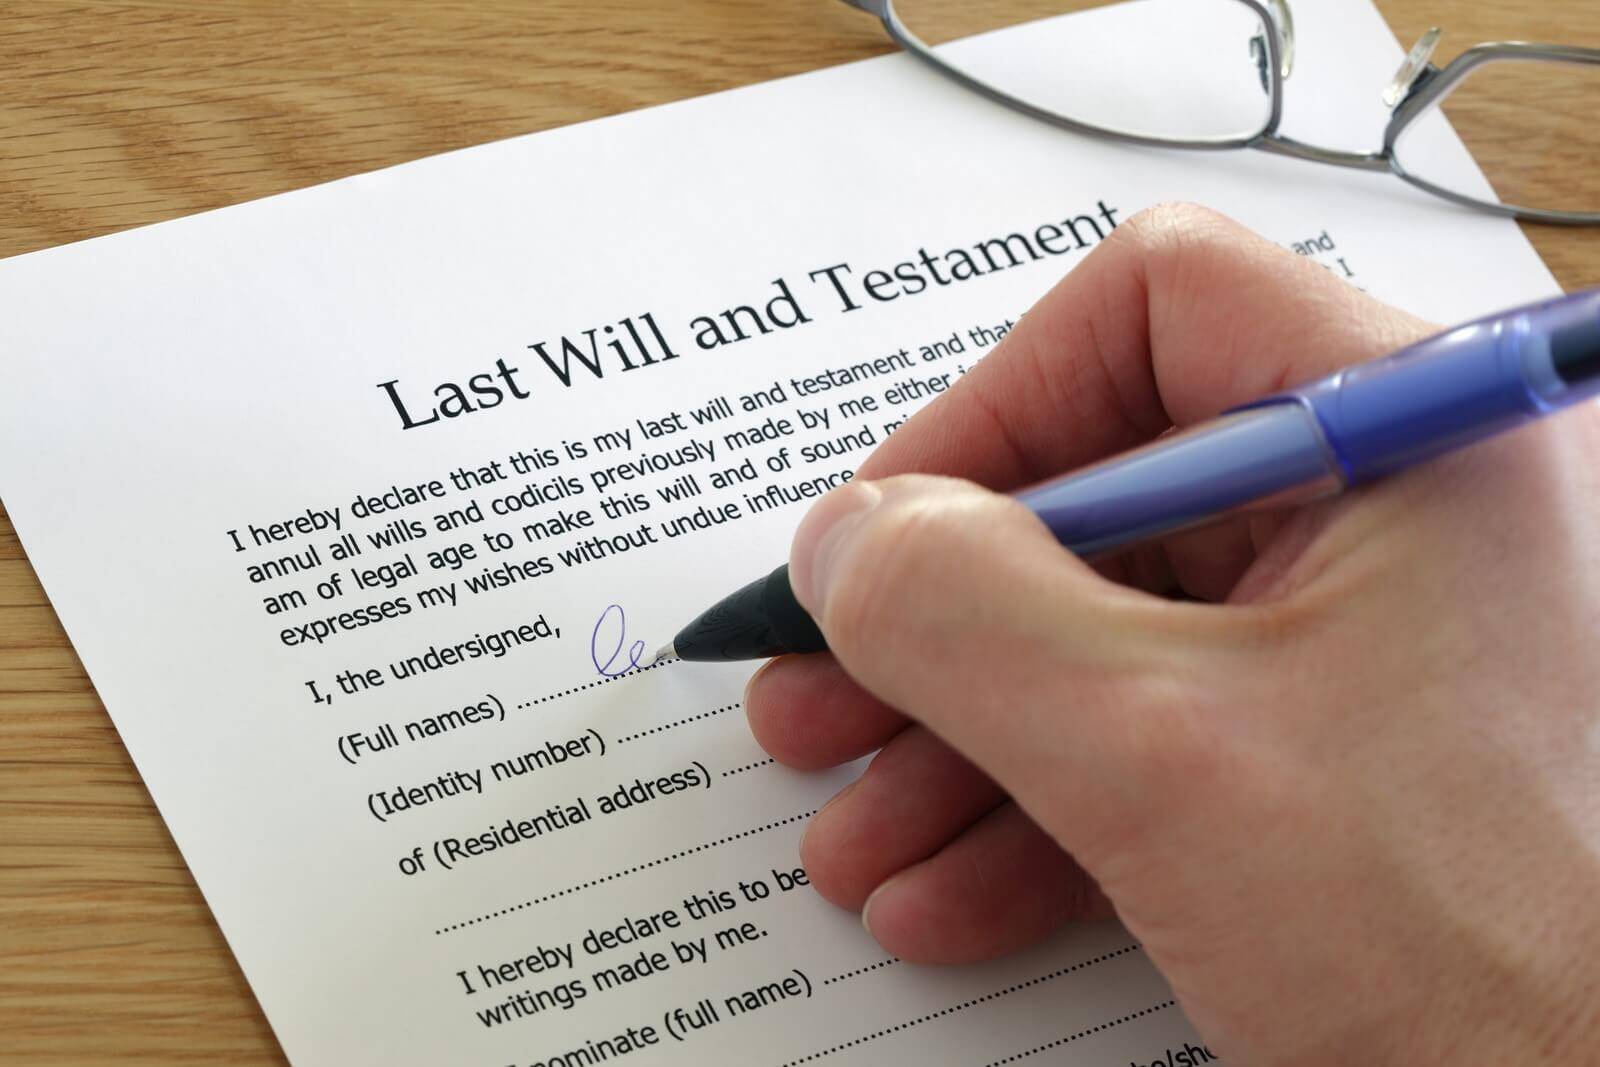 Making a Will in Cyprus